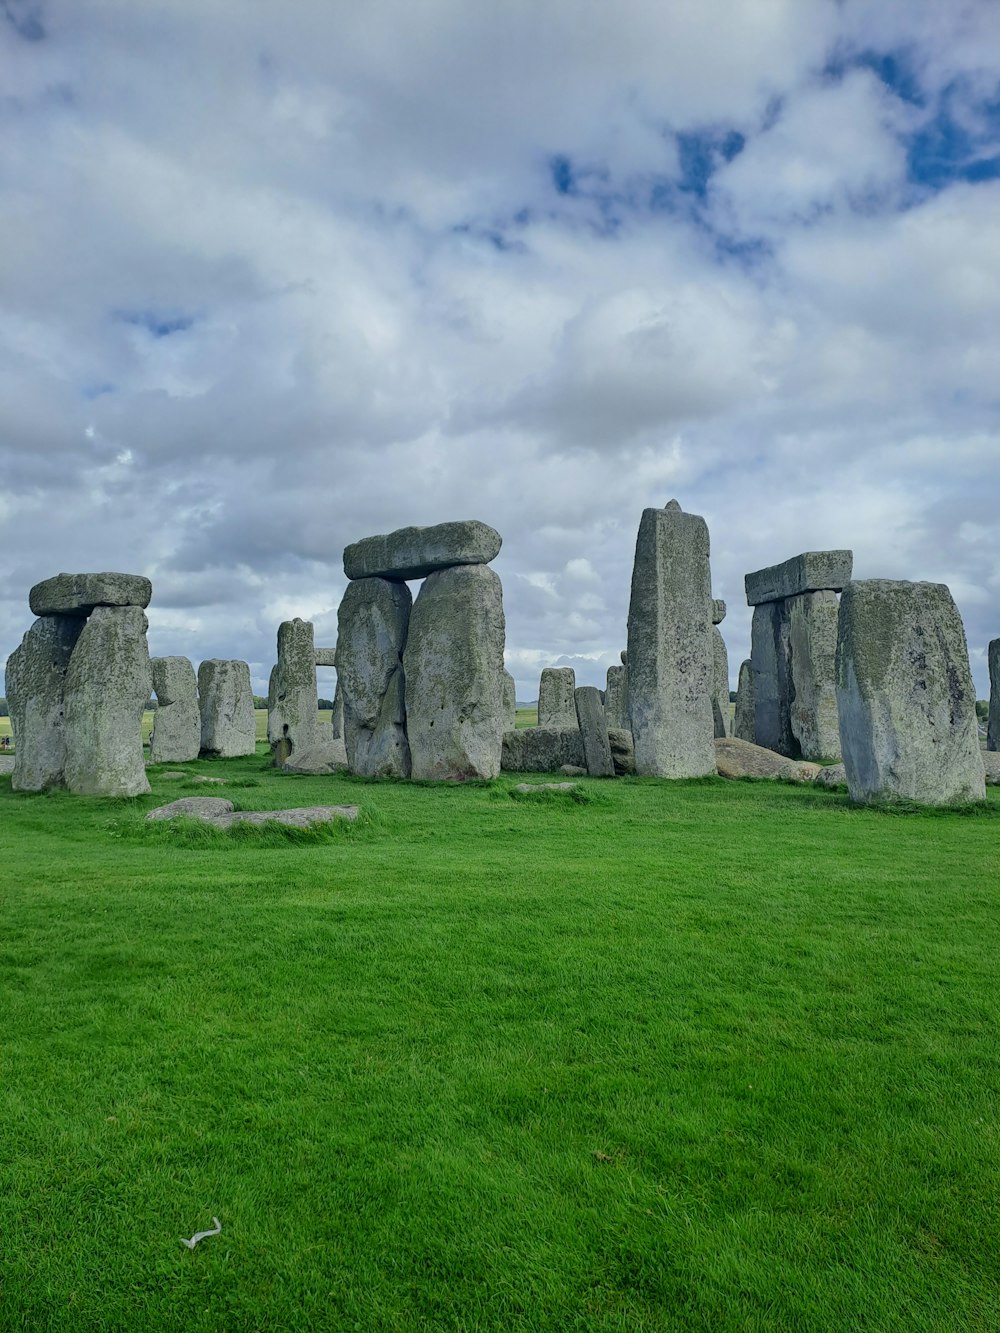 a large stonehenge in a grassy field under a cloudy sky